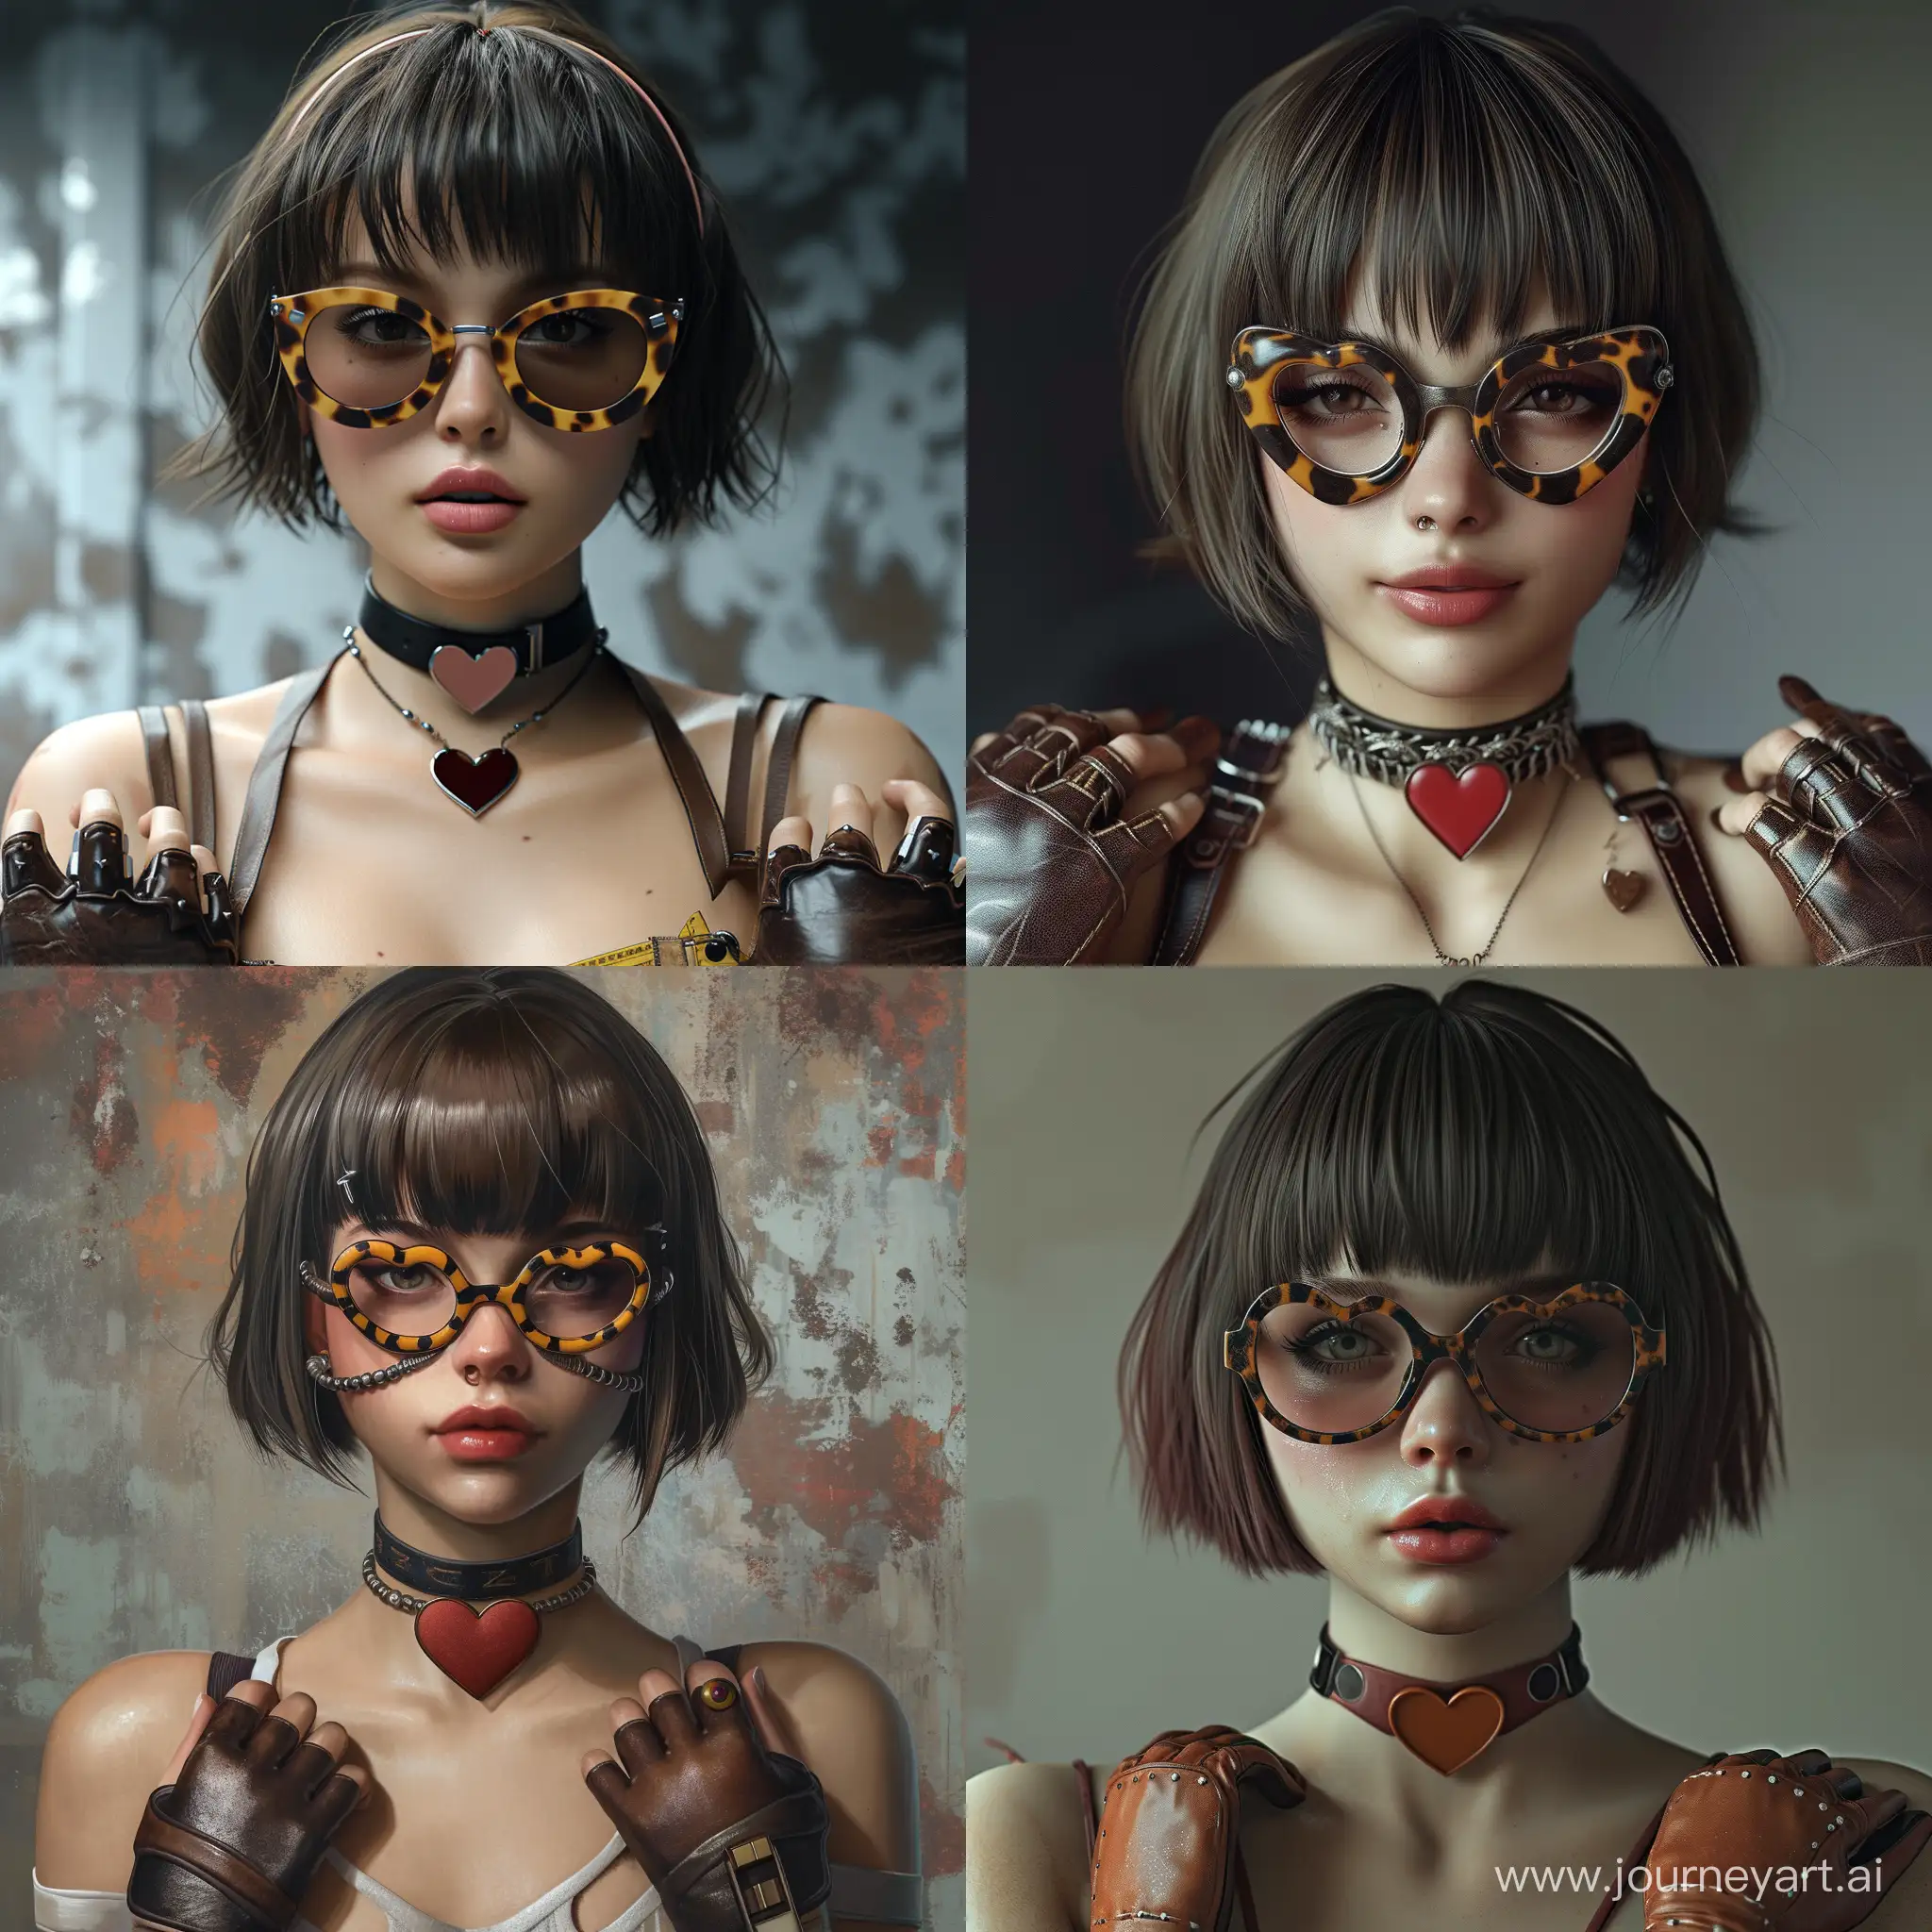 Photorealistic-Sexy-Nerd-Girl-with-Short-Hair-and-Bangs-Wearing-Cateye-Tortoise-Glasses-and-Fingerless-Leather-Gloves